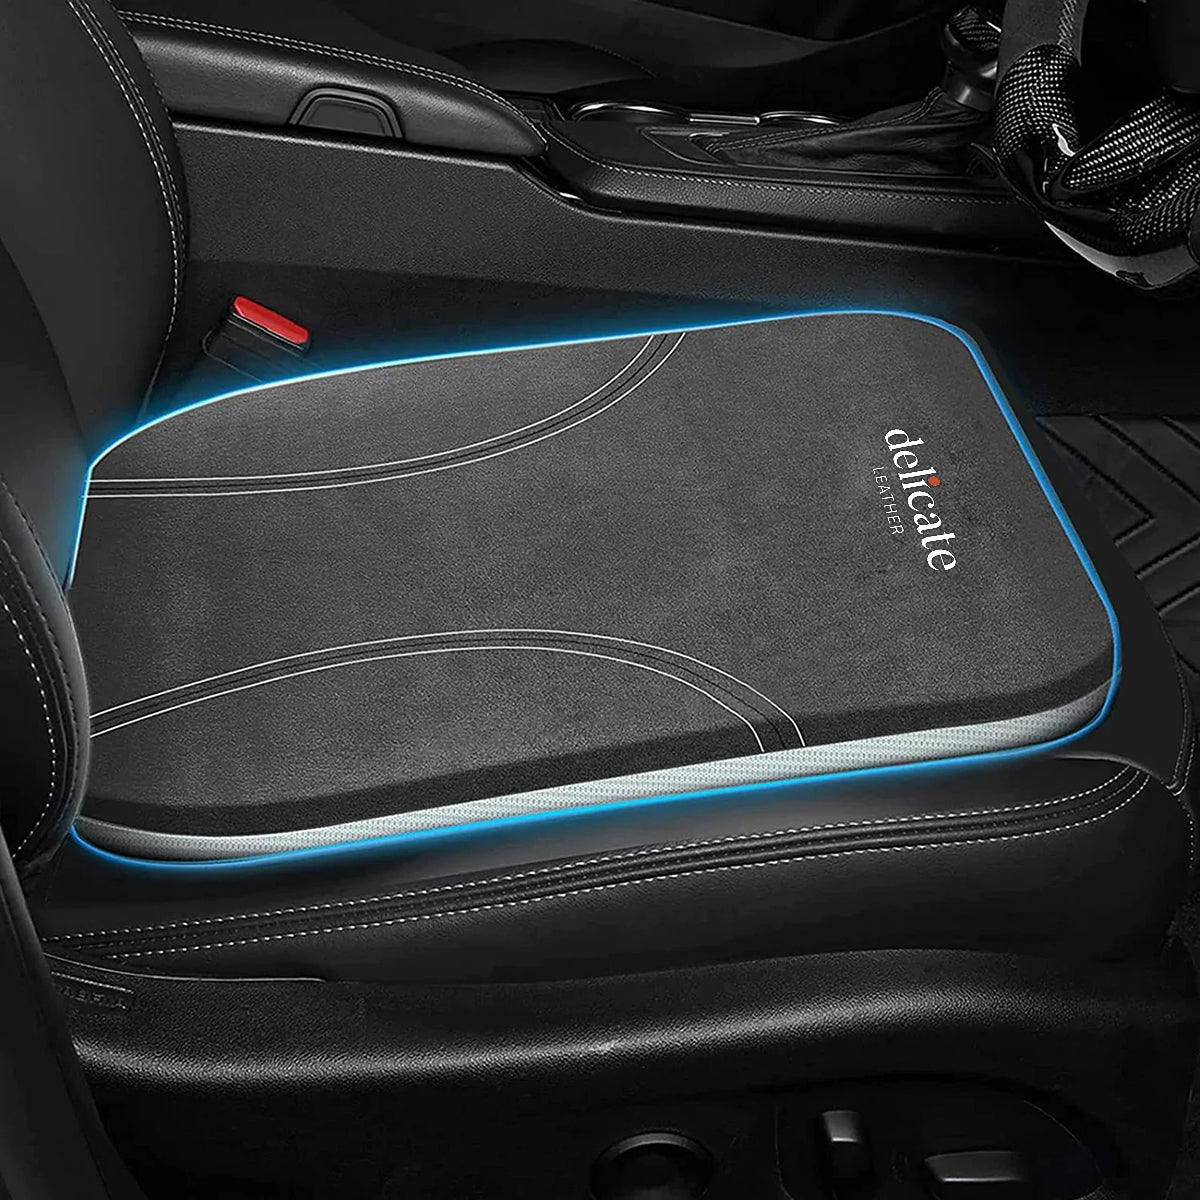 KIA Car Seat Cushion: Enhance Comfort and Support for Your Drive